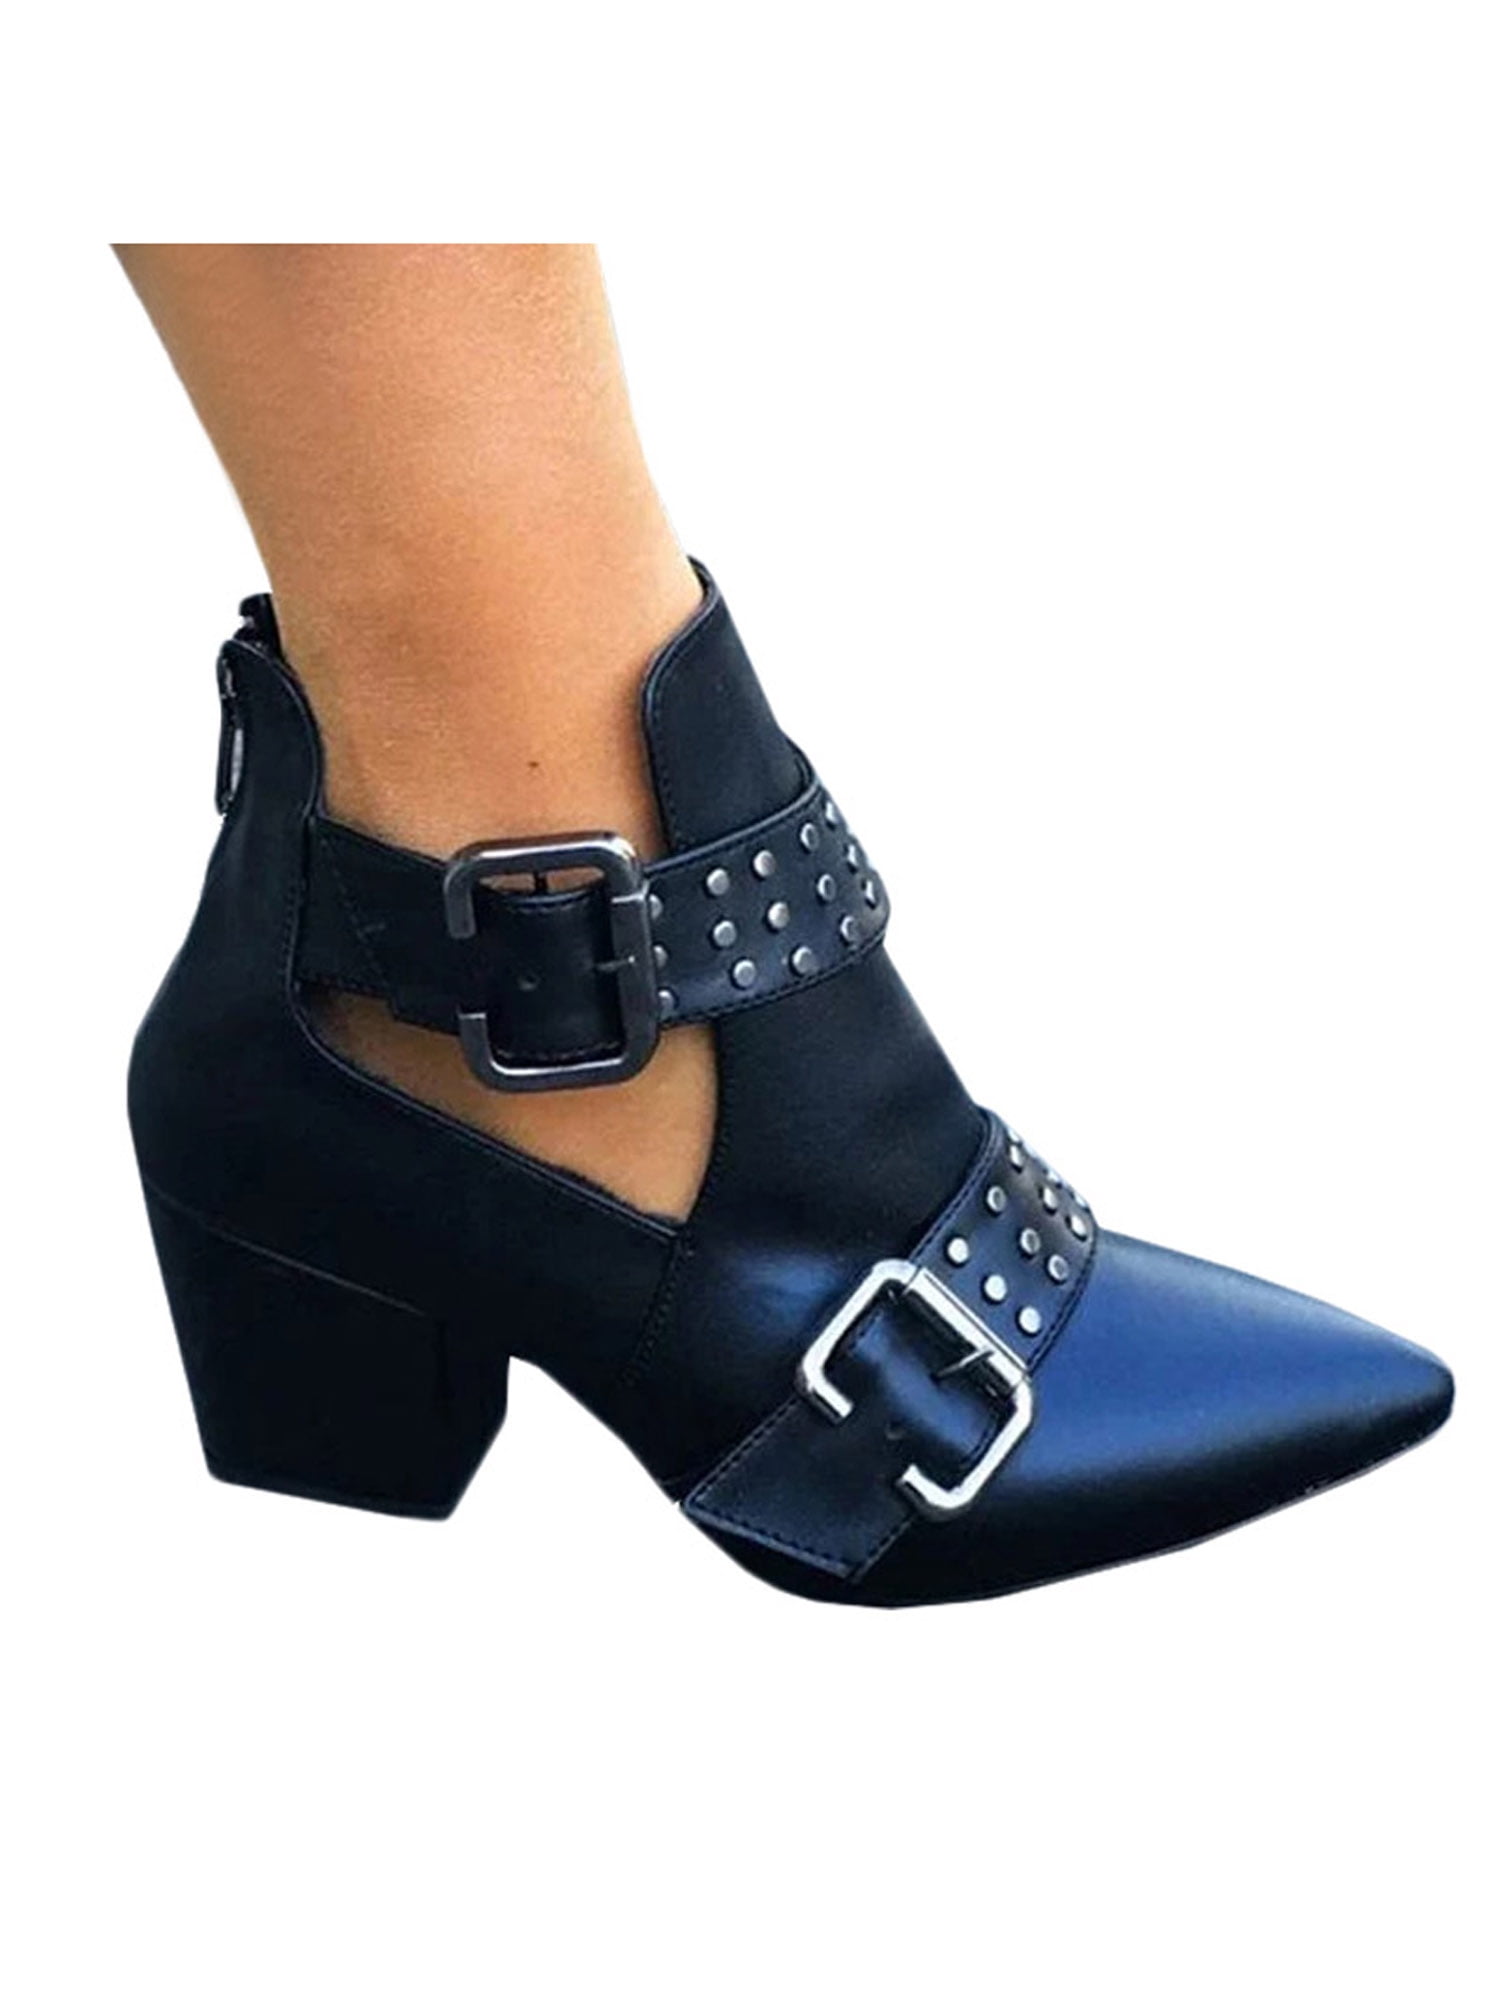 Premier Standard Womens Ankle Bootie with Low Heel and Cut-Out Side Design